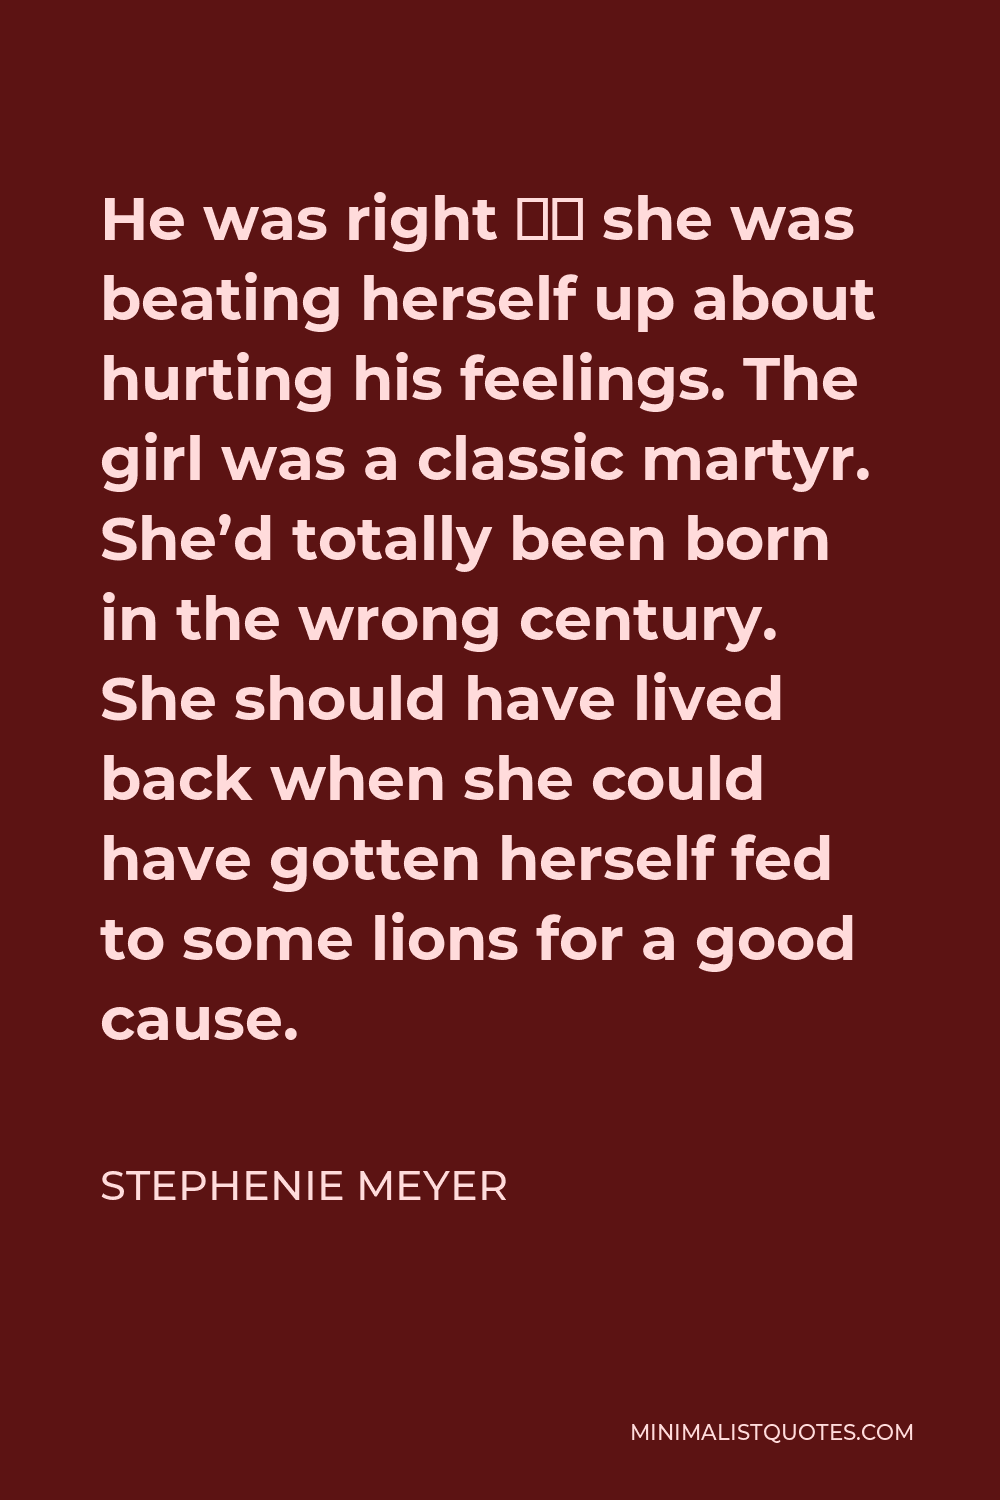 Stephenie Meyer Quote - He was right – she was beating herself up about hurting his feelings. The girl was a classic martyr. She’d totally been born in the wrong century. She should have lived back when she could have gotten herself fed to some lions for a good cause.